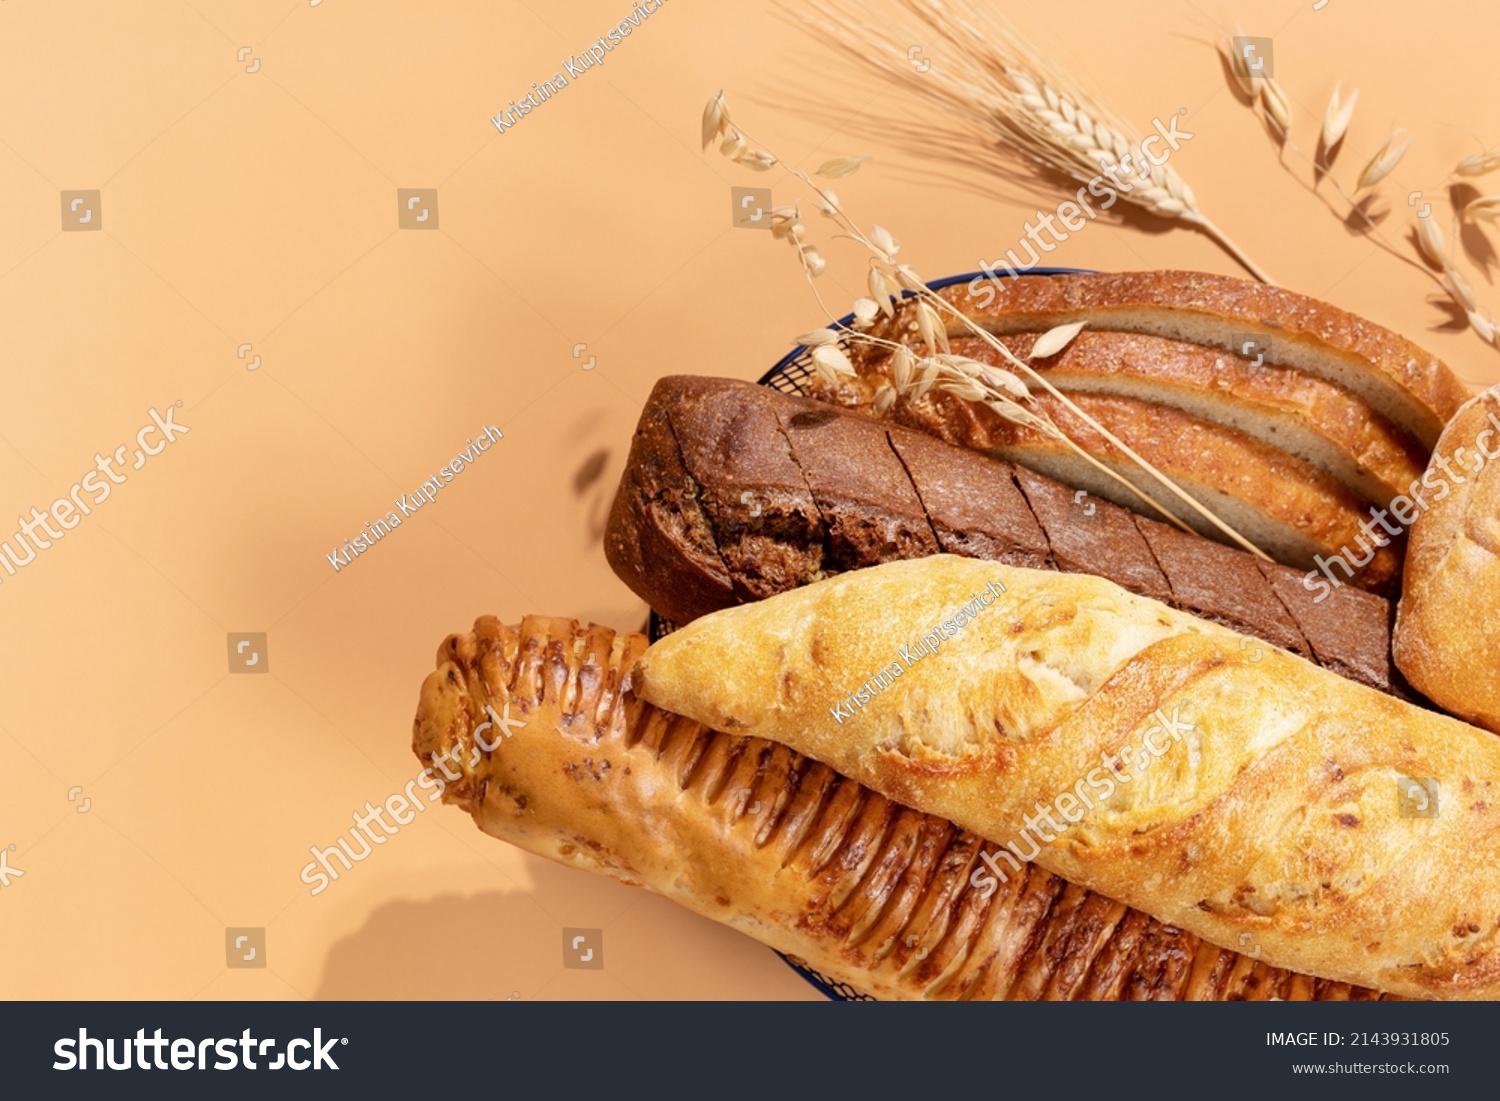 Homemade natural breads. Fresh loafs of bread in the blue basket with ears of rye and wheat on a beige background with copy space. Crunchy french baguettes, slices of bread and a bun. Soft focus  #2143931805